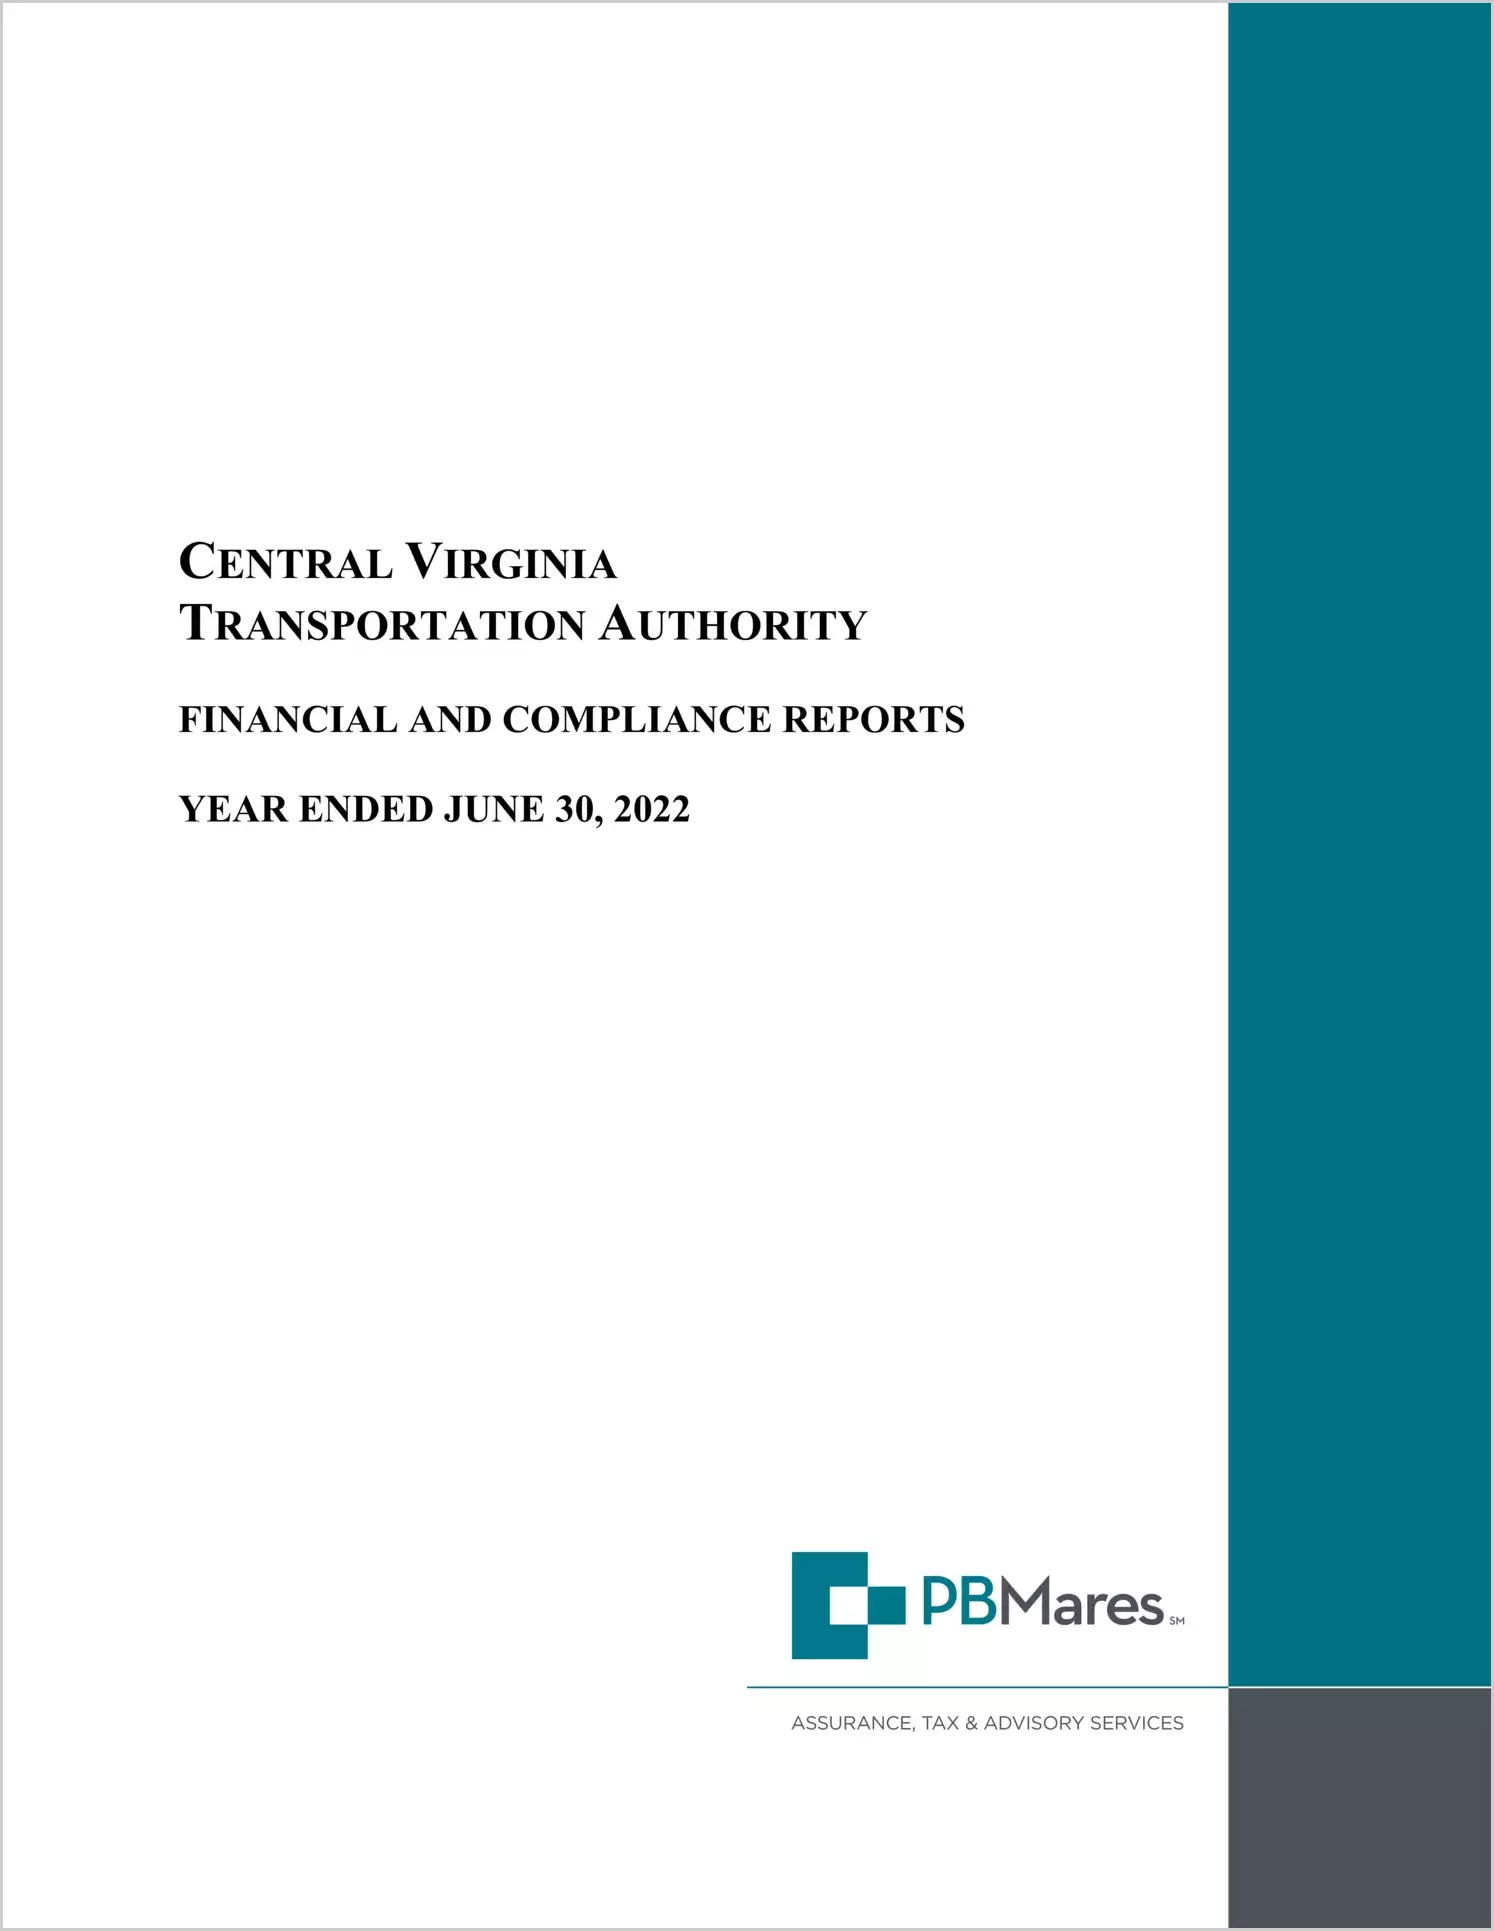 Central Virginia Transportation Authority for the year ended June 30, 2022